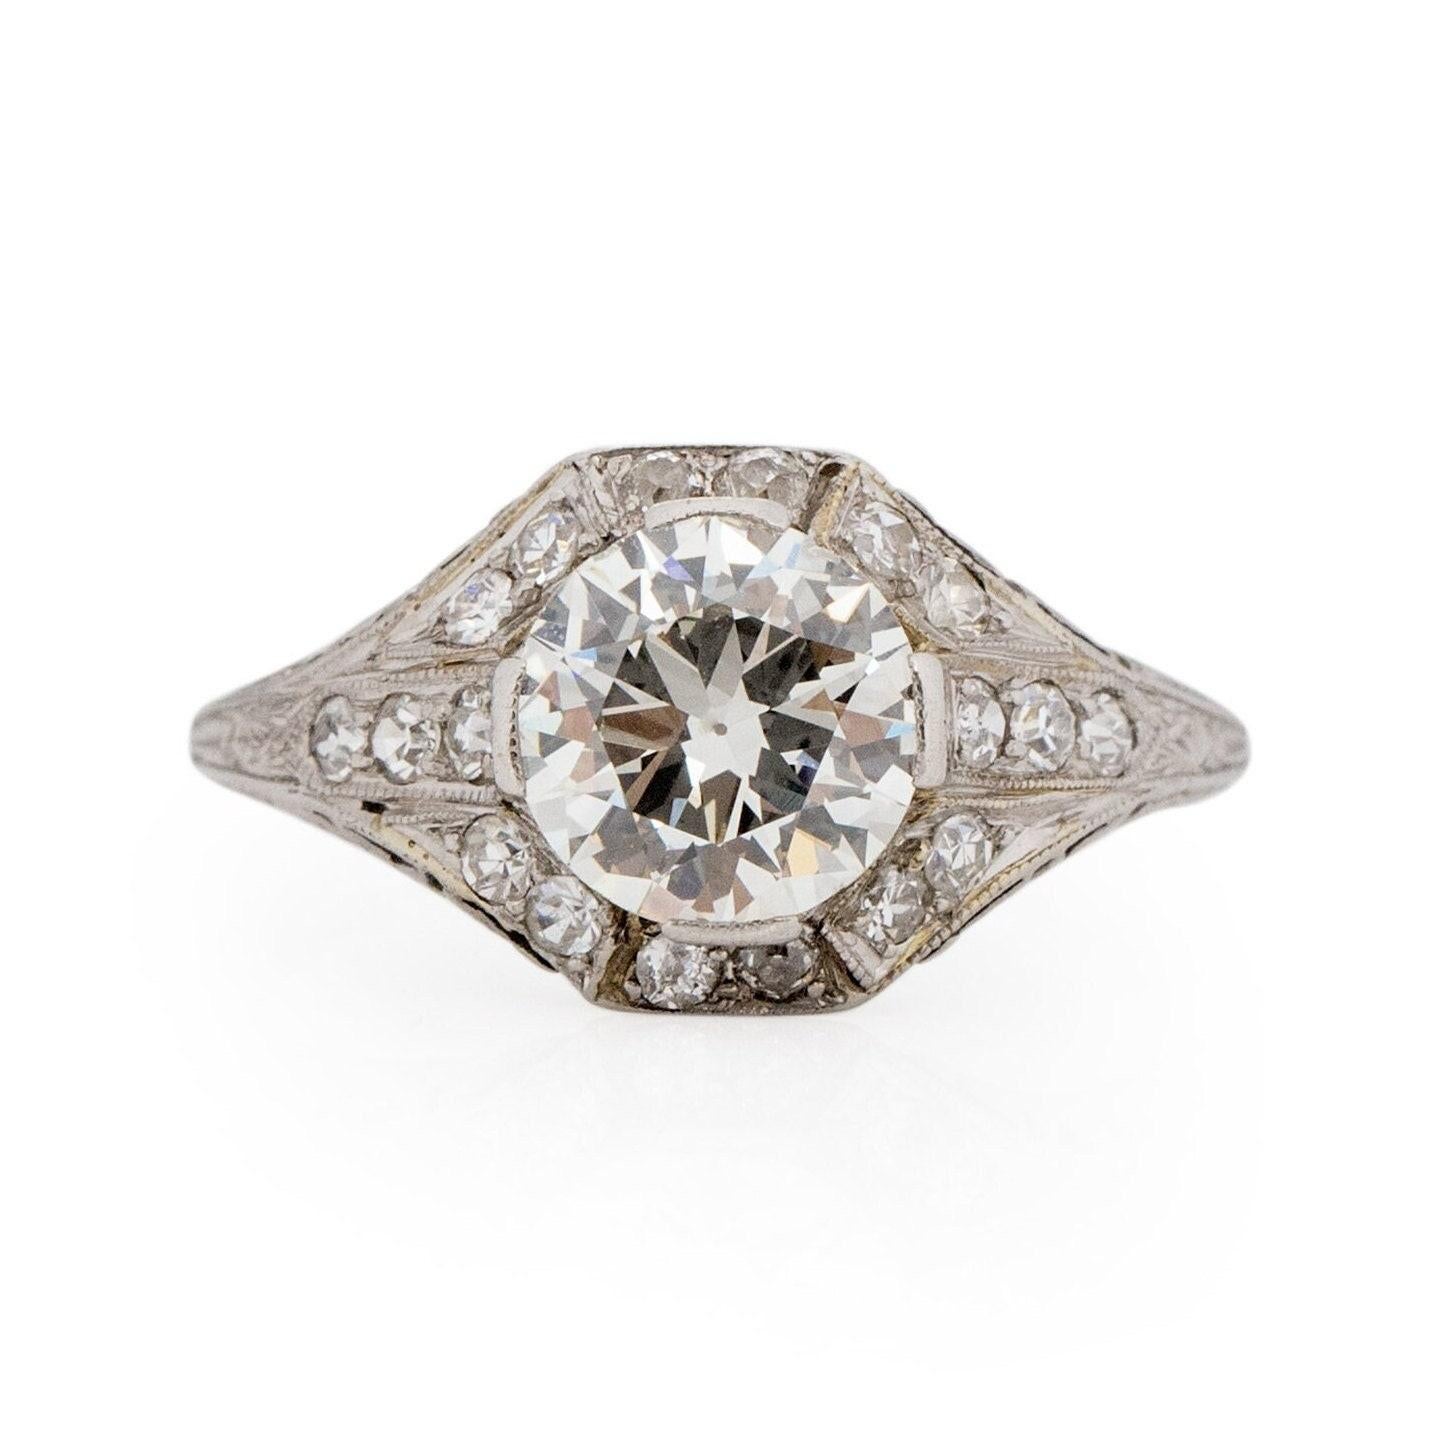 Behold this captivating Art Deco masterpiece, a breathtaking embodiment of style. It's becoming increasingly challenging to find rings with diamonds of this size and quality. The centerpiece features a magnificent 1.55 Ct Old European cut diamond